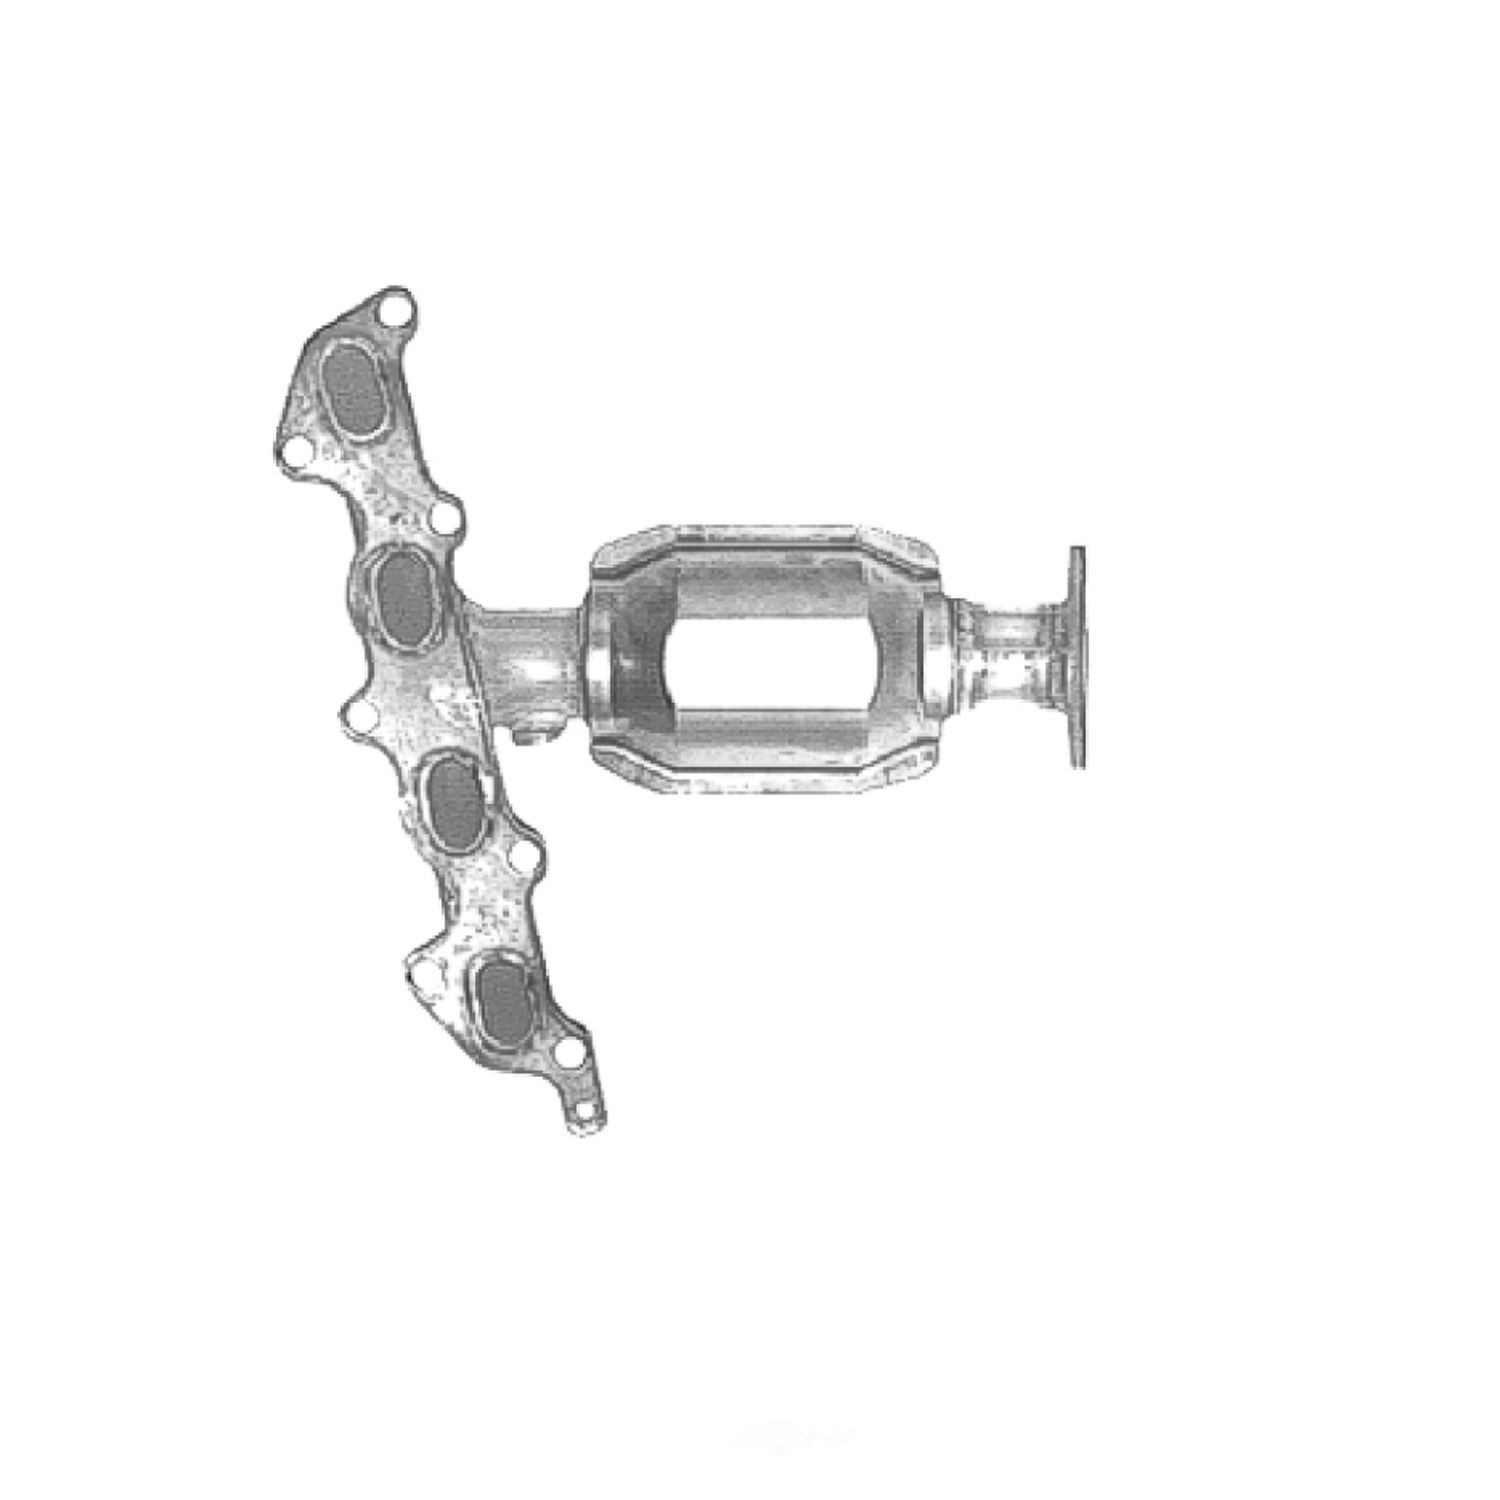 AP EXHAUST W/FEDERAL CONVERTER - Catalytic Converter with Integrated Exhaust Manifold - APF 641194